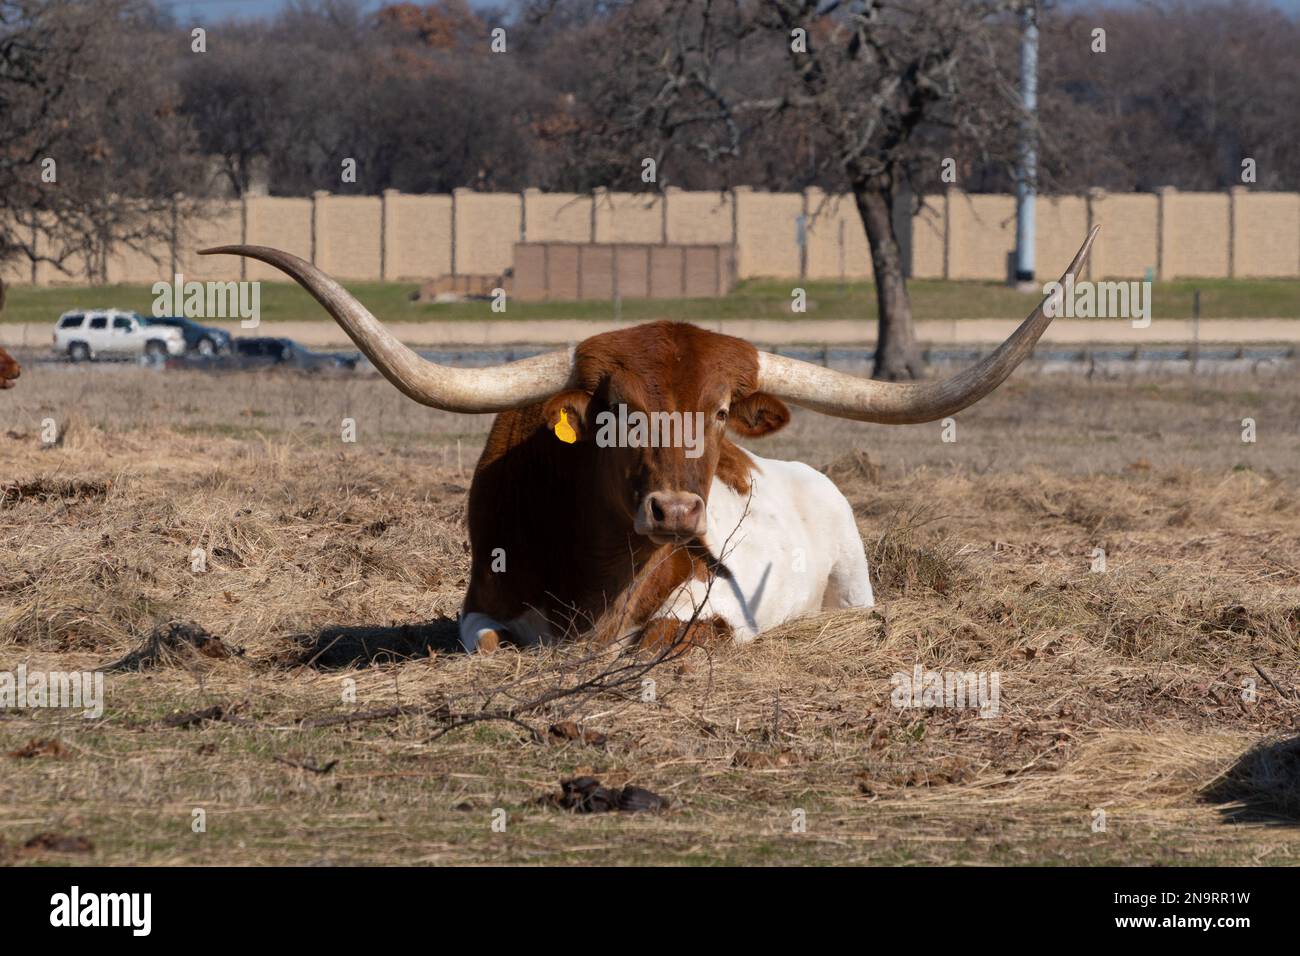 An orange ad white Longhorn cow with long, curved horns relaxing in a bed of hay in a ranch pasture while cars drive by on a road in the background. Stock Photo